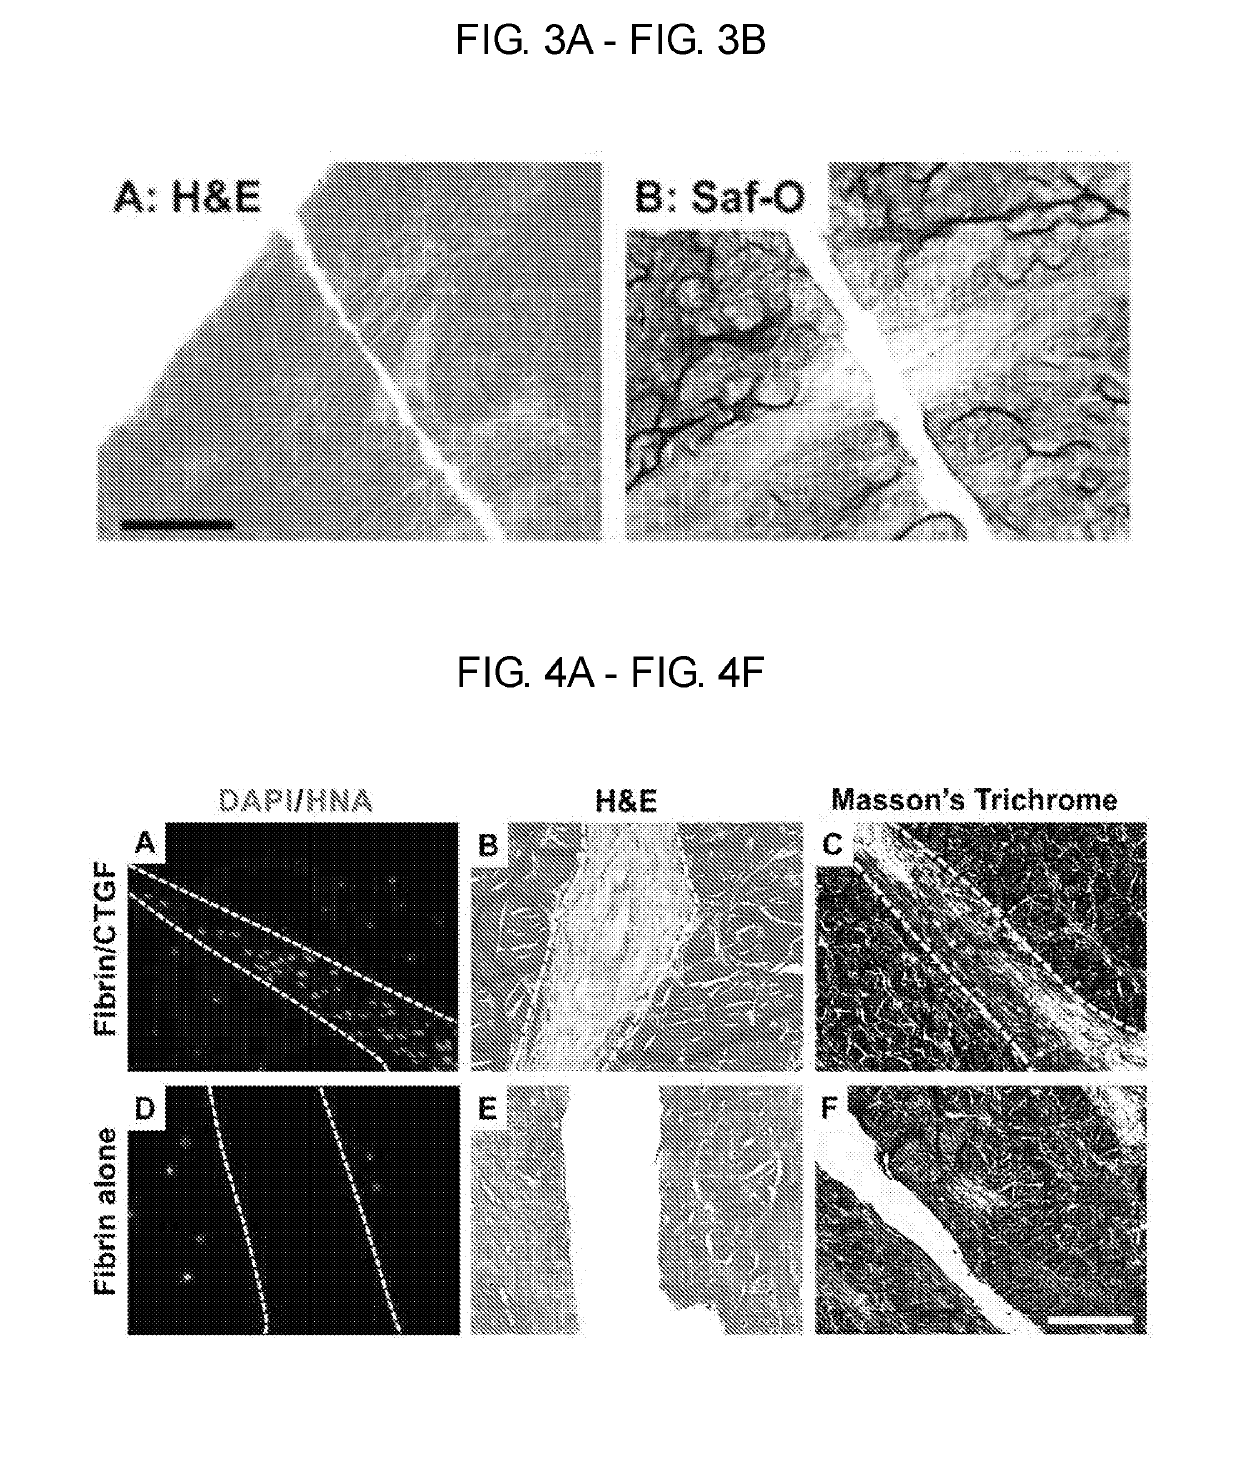 Tissue repair by stem cell recruitment and differentiation